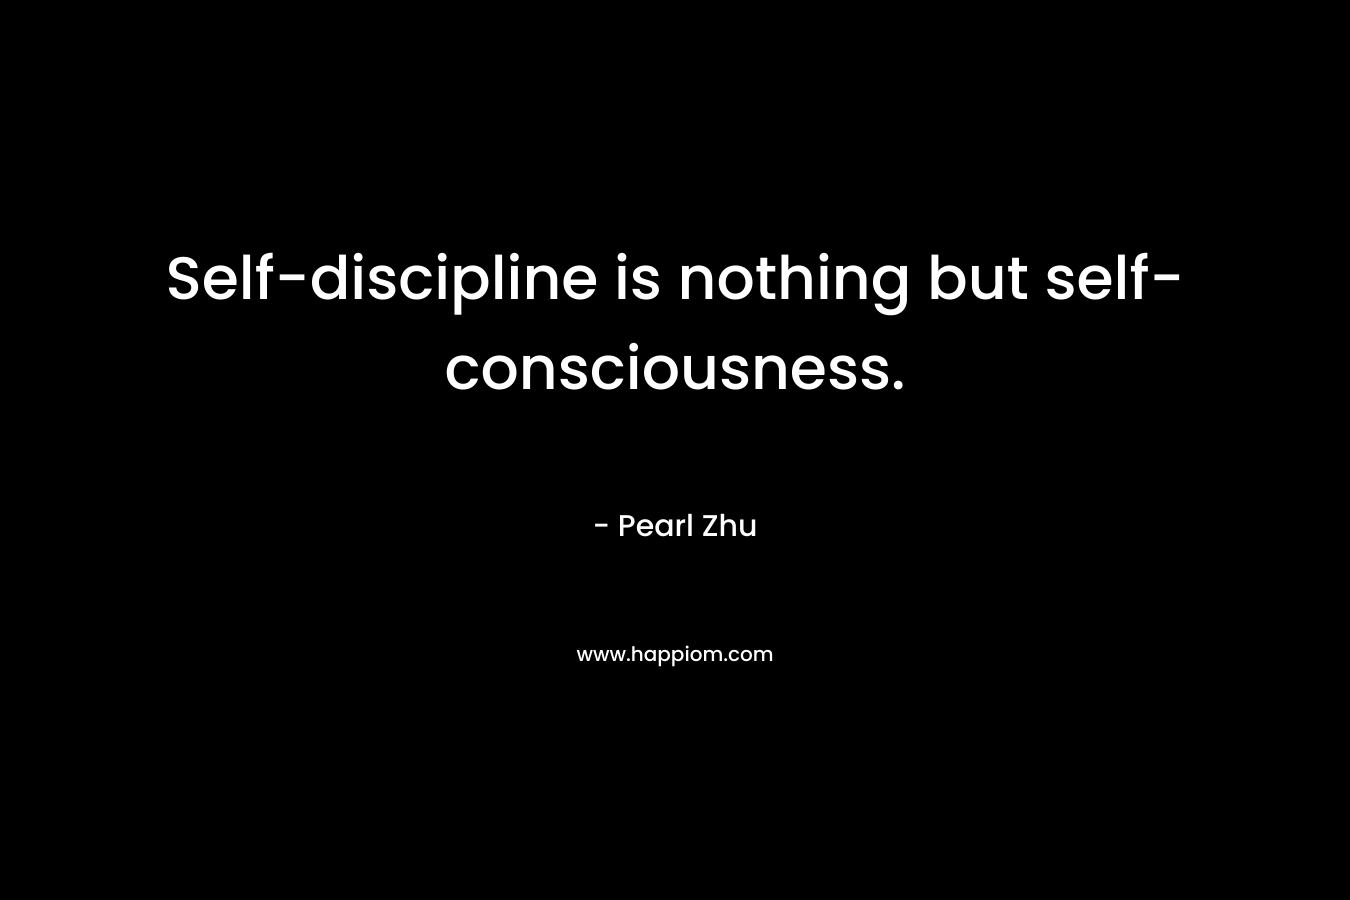 Self-discipline is nothing but self-consciousness.